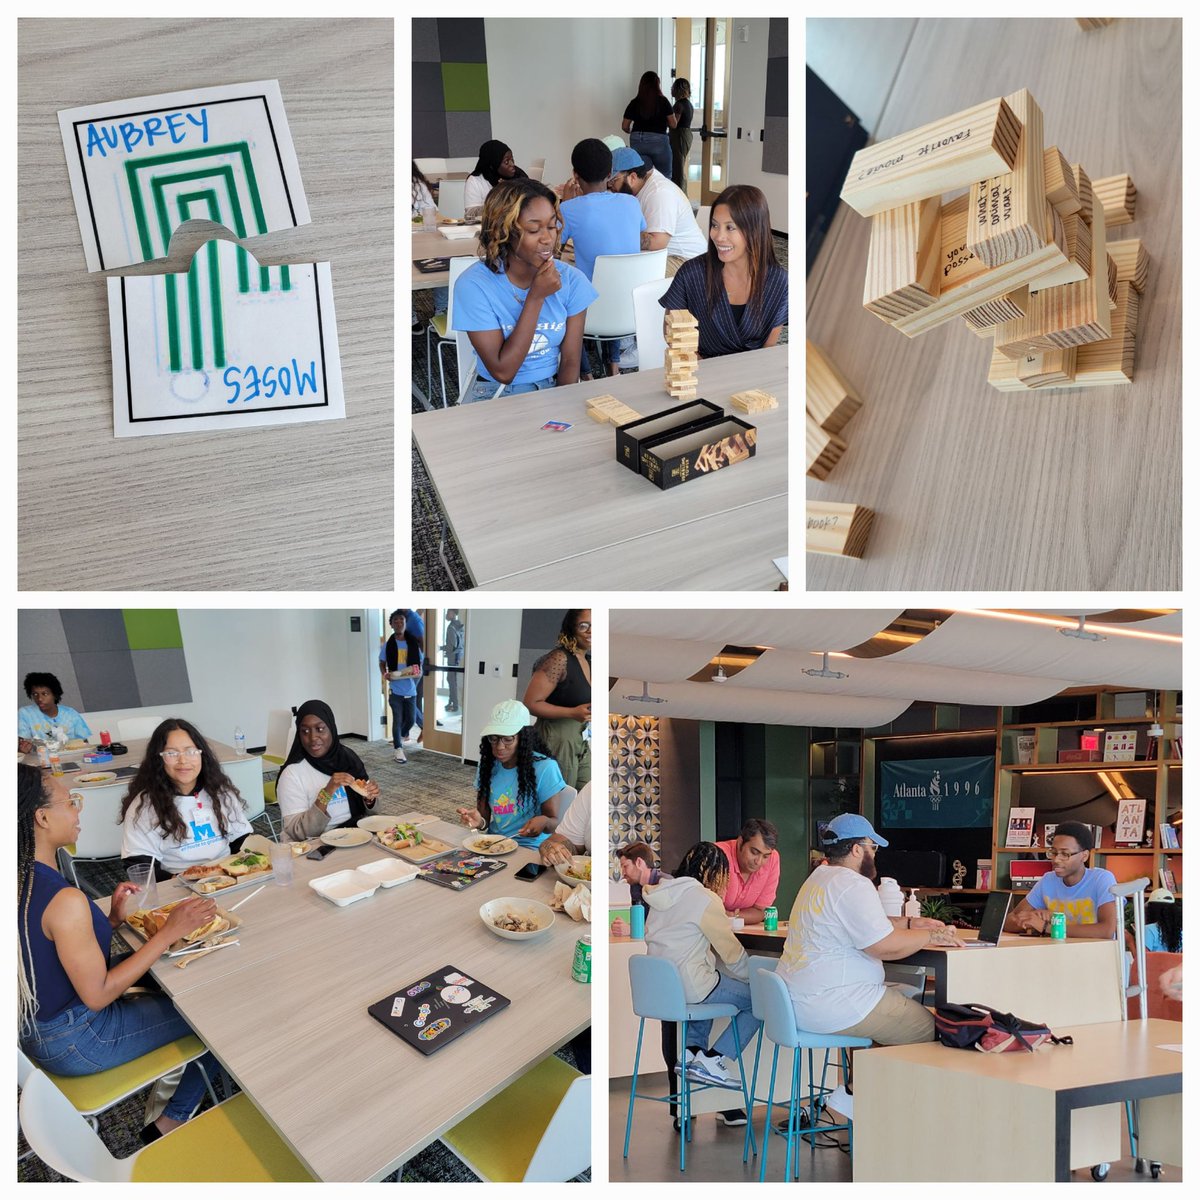 It takes a village! Thank you to @BBBSatl and @Google for being a part of the @MaysHSOnTheHill village. Today was aMAYSing. Students were introduced to their 'Big' (mentors) at Google's HQ. Activities centered around developing meaningful relationships. @BEMaysPRIDE @MsSongbyrd2